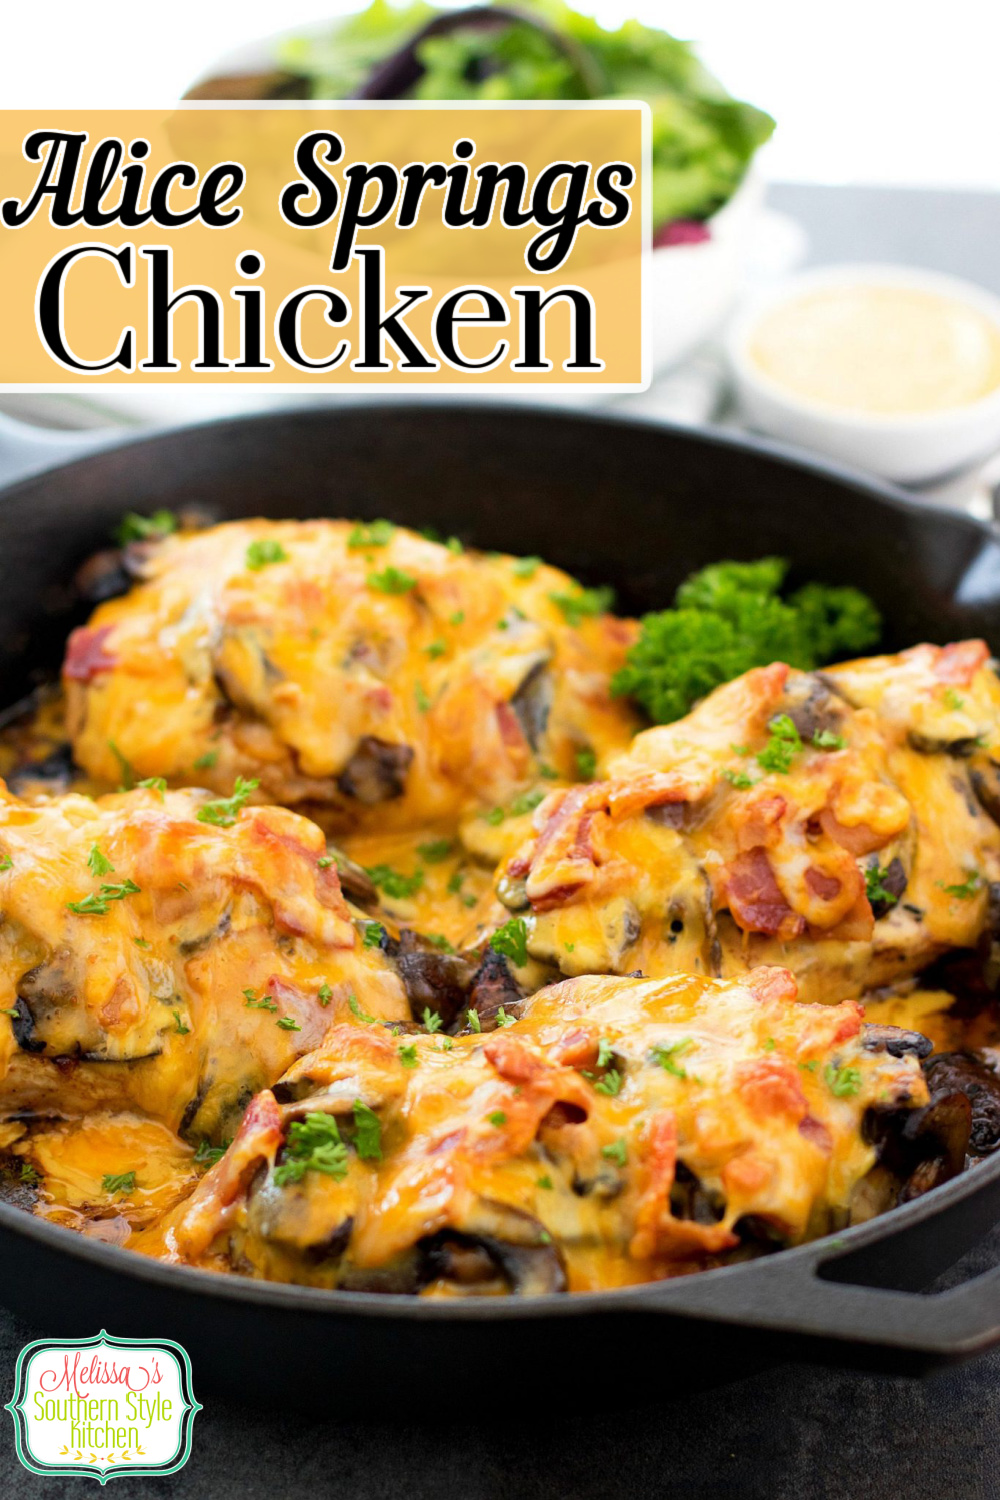 This better-than-copycat Alice Springs Chicken will have you dining on a restaurant favorite at your own kitchen table #alicespringschicken #copycatrecipes #easychickenbreastrecipes #poultry #chickenrecipes #dinner #dinnerideas #honeymustard #copycatalicespringschicken #mushrooms #southernfood #southernrecipes via @melissasssk